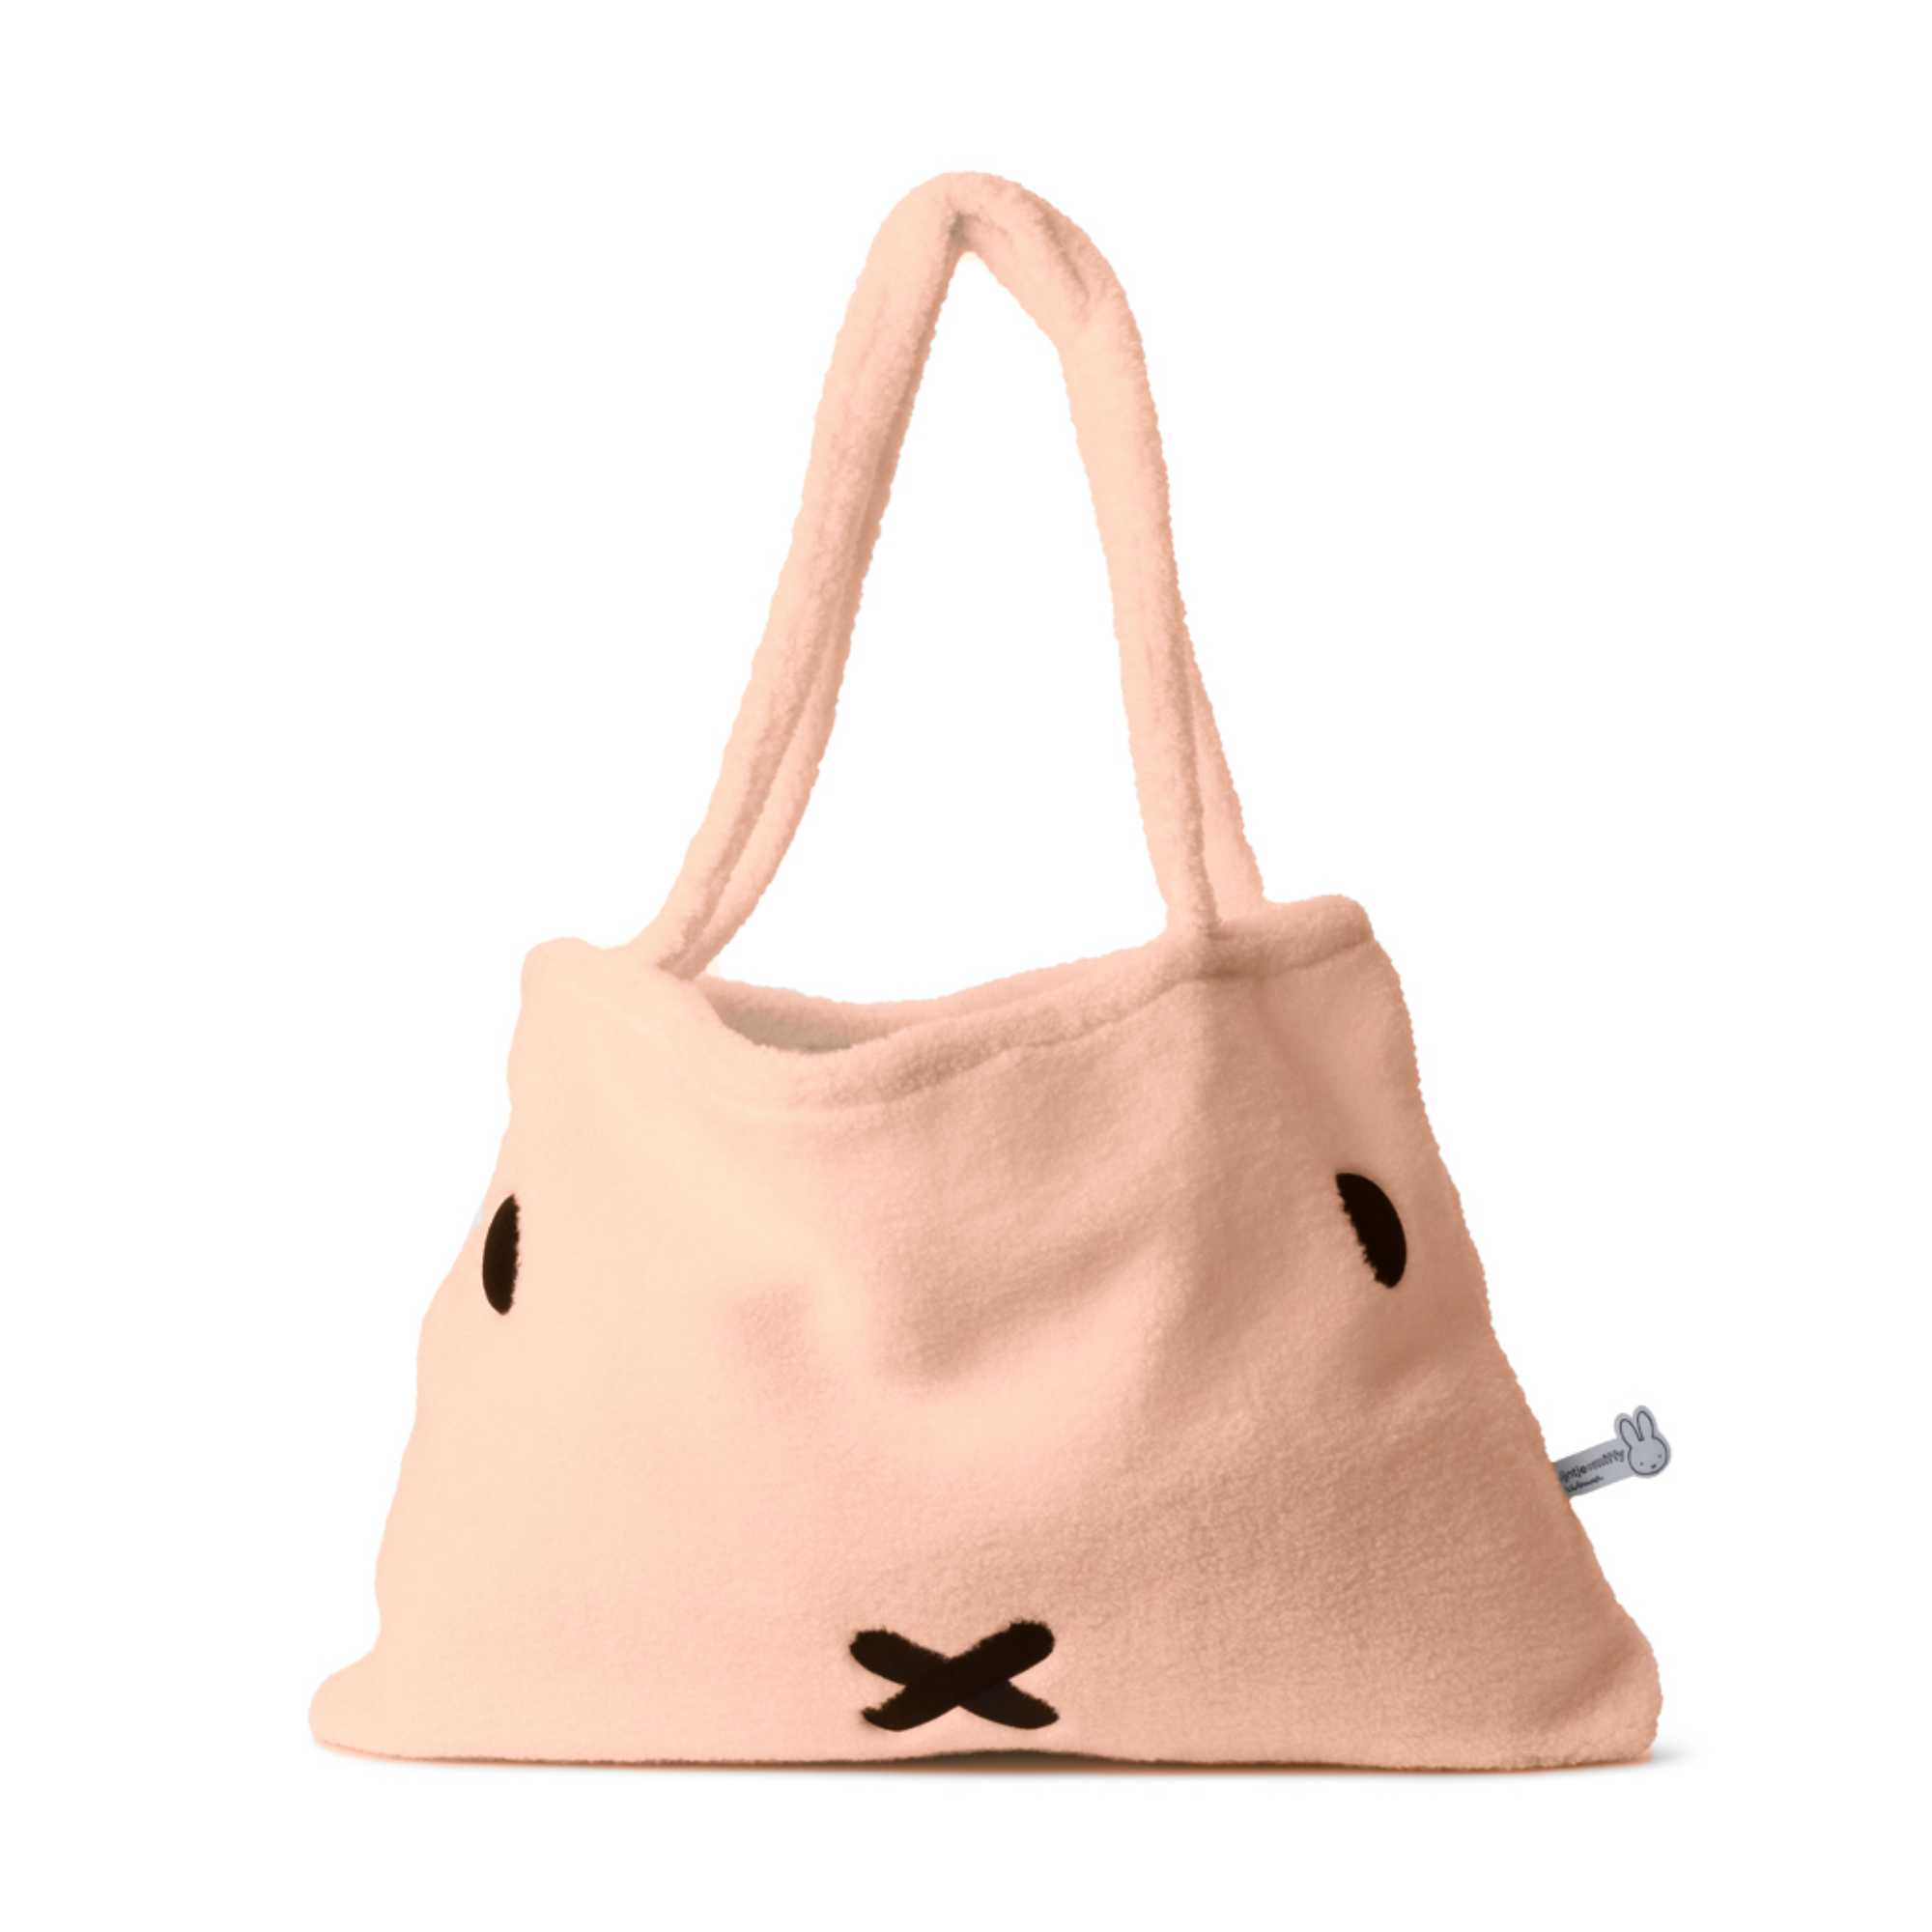 Miffy Shopping Bag, Recycled Teddy Beige